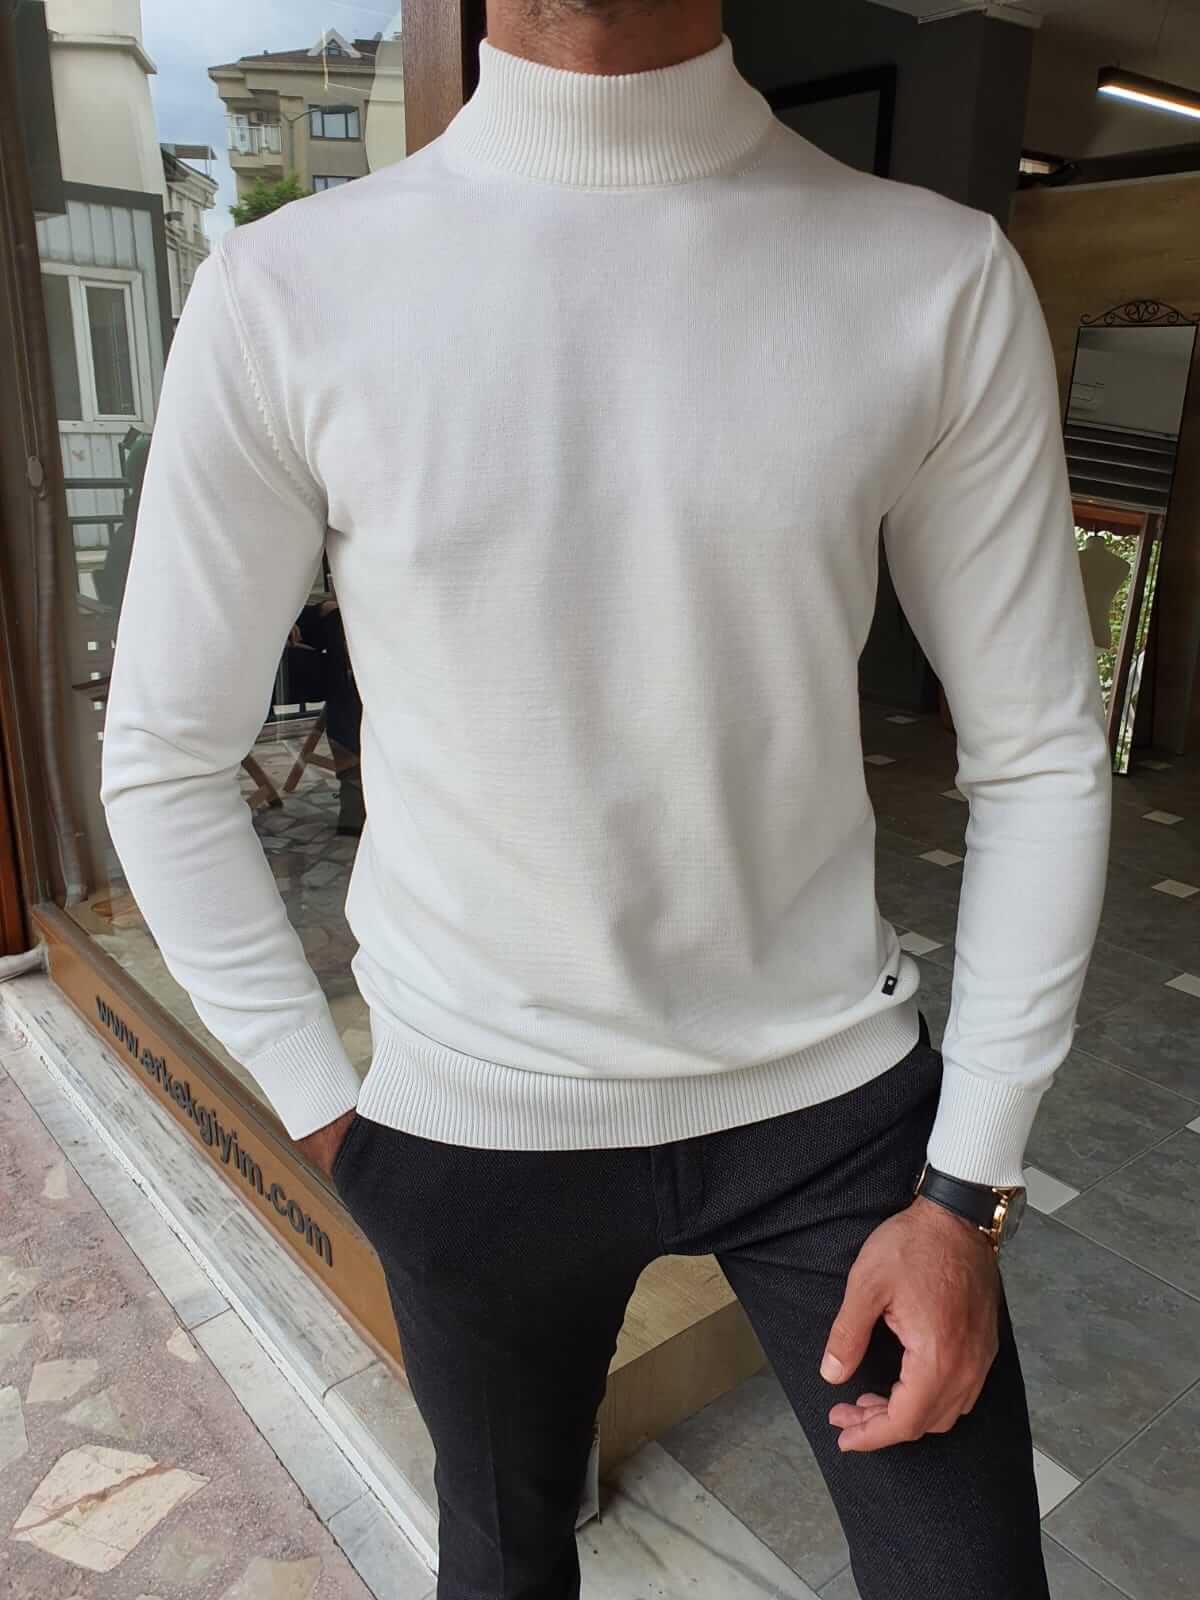 A white turtleneck sweater, neatly folded and displayed on a flat surface